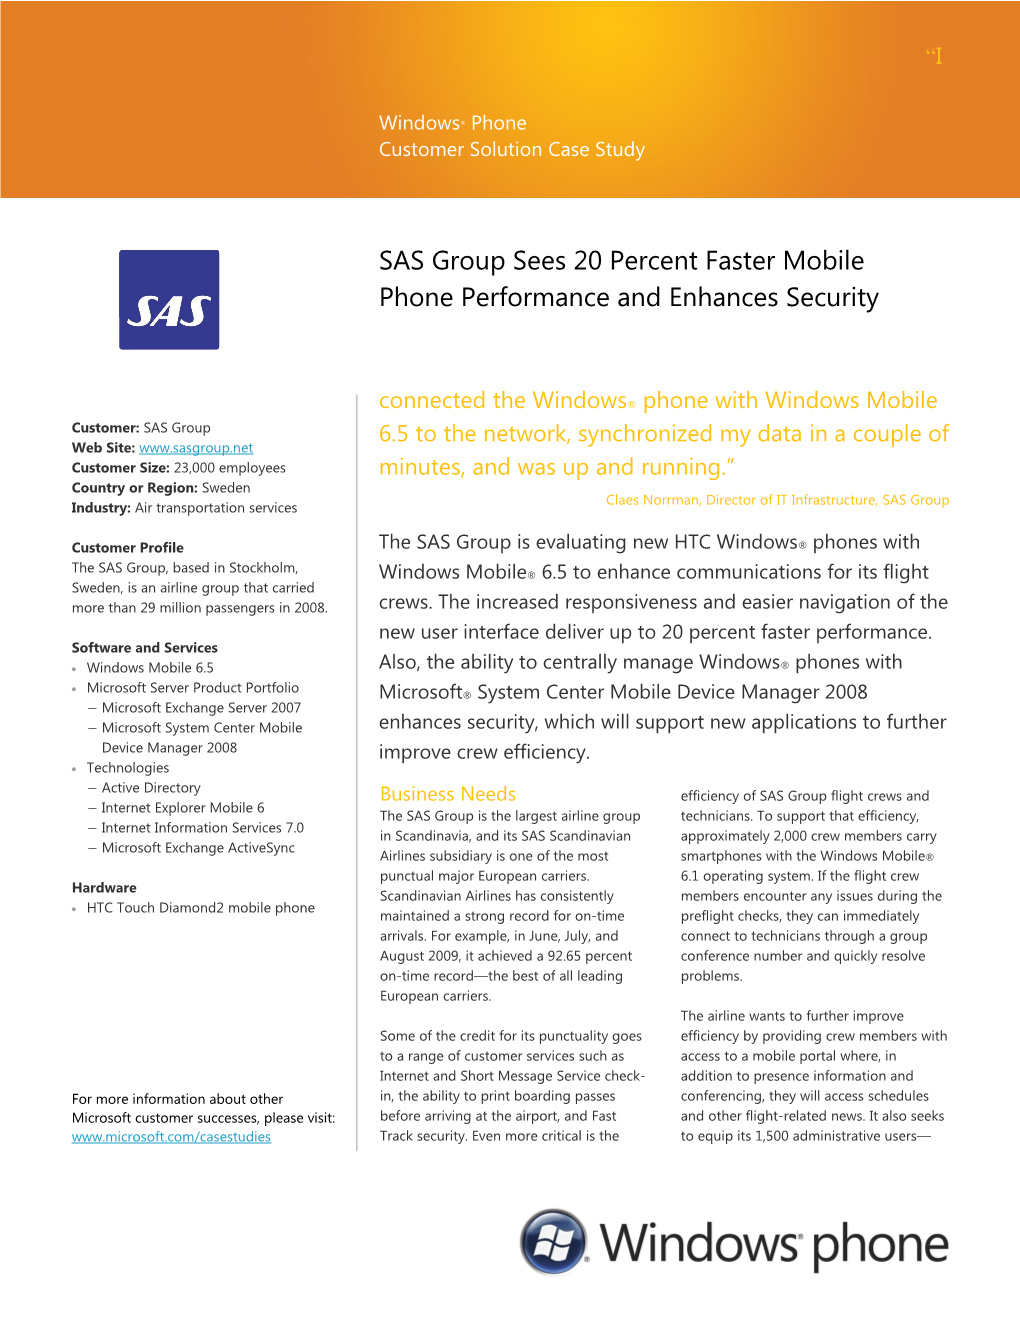 SAS Group Sees 20 Percent Faster Mobile Phone Performance and Enhances Security